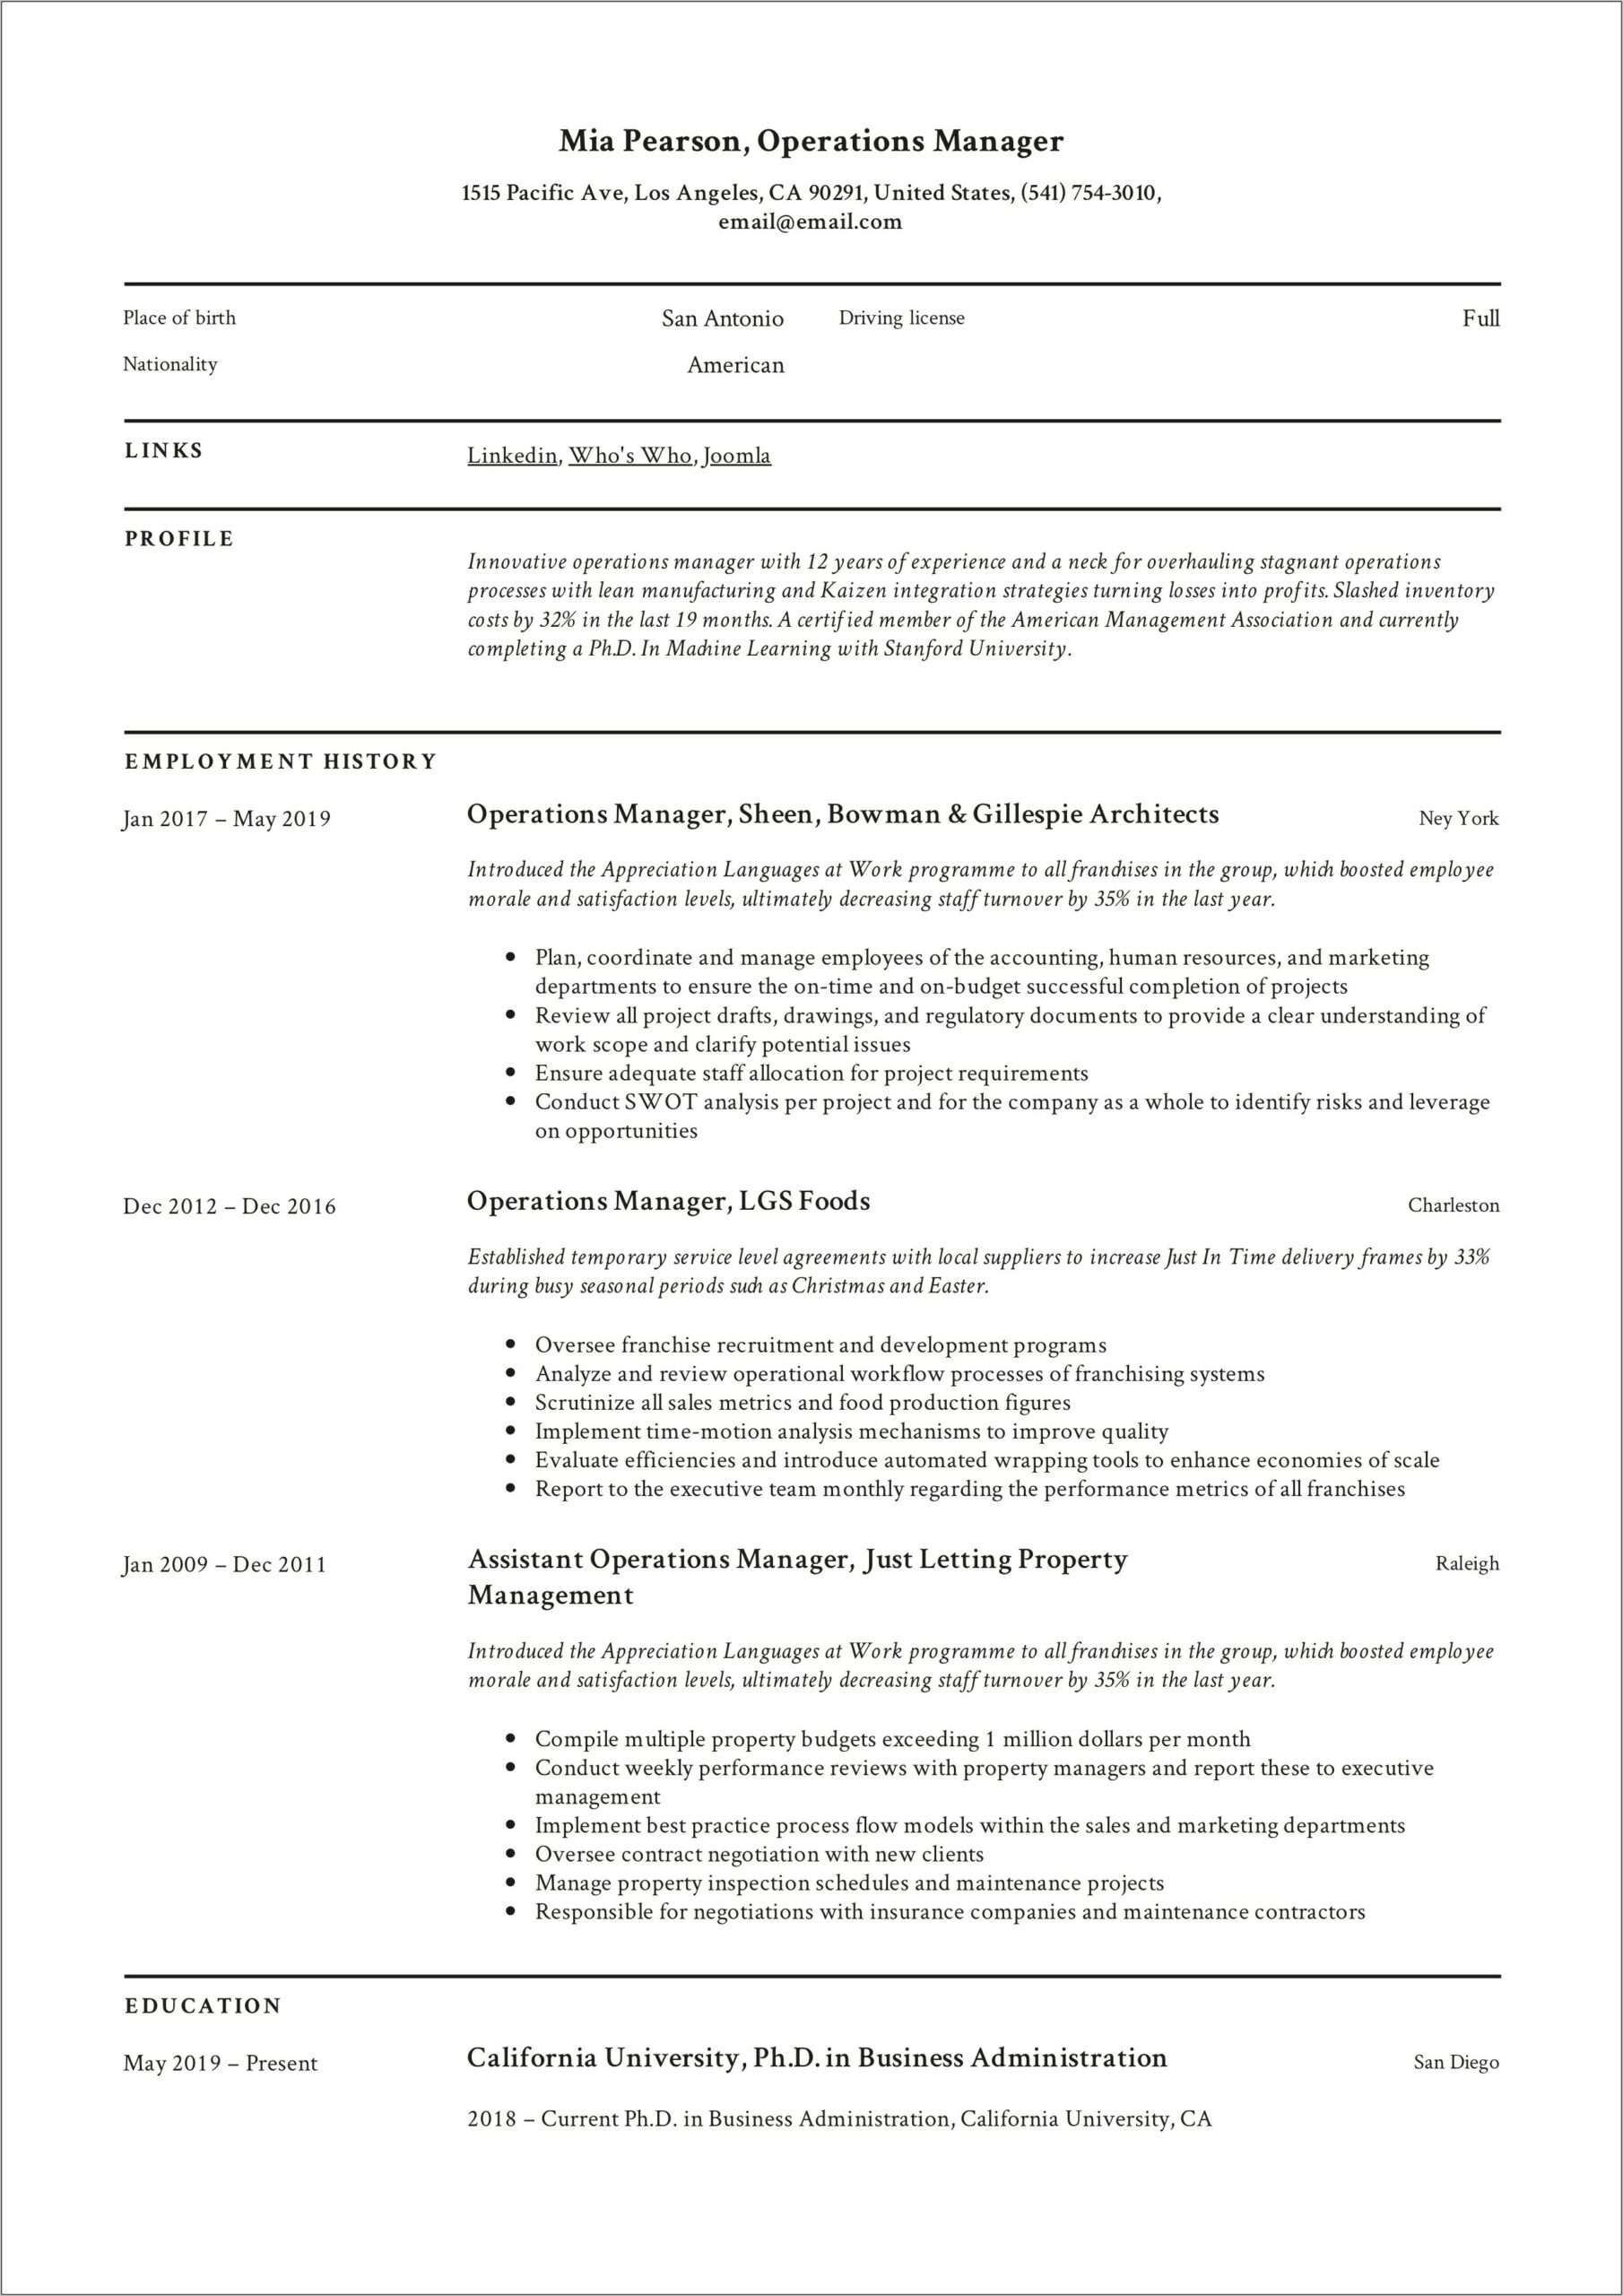 Resume Introduction Paragraph Operations Manager